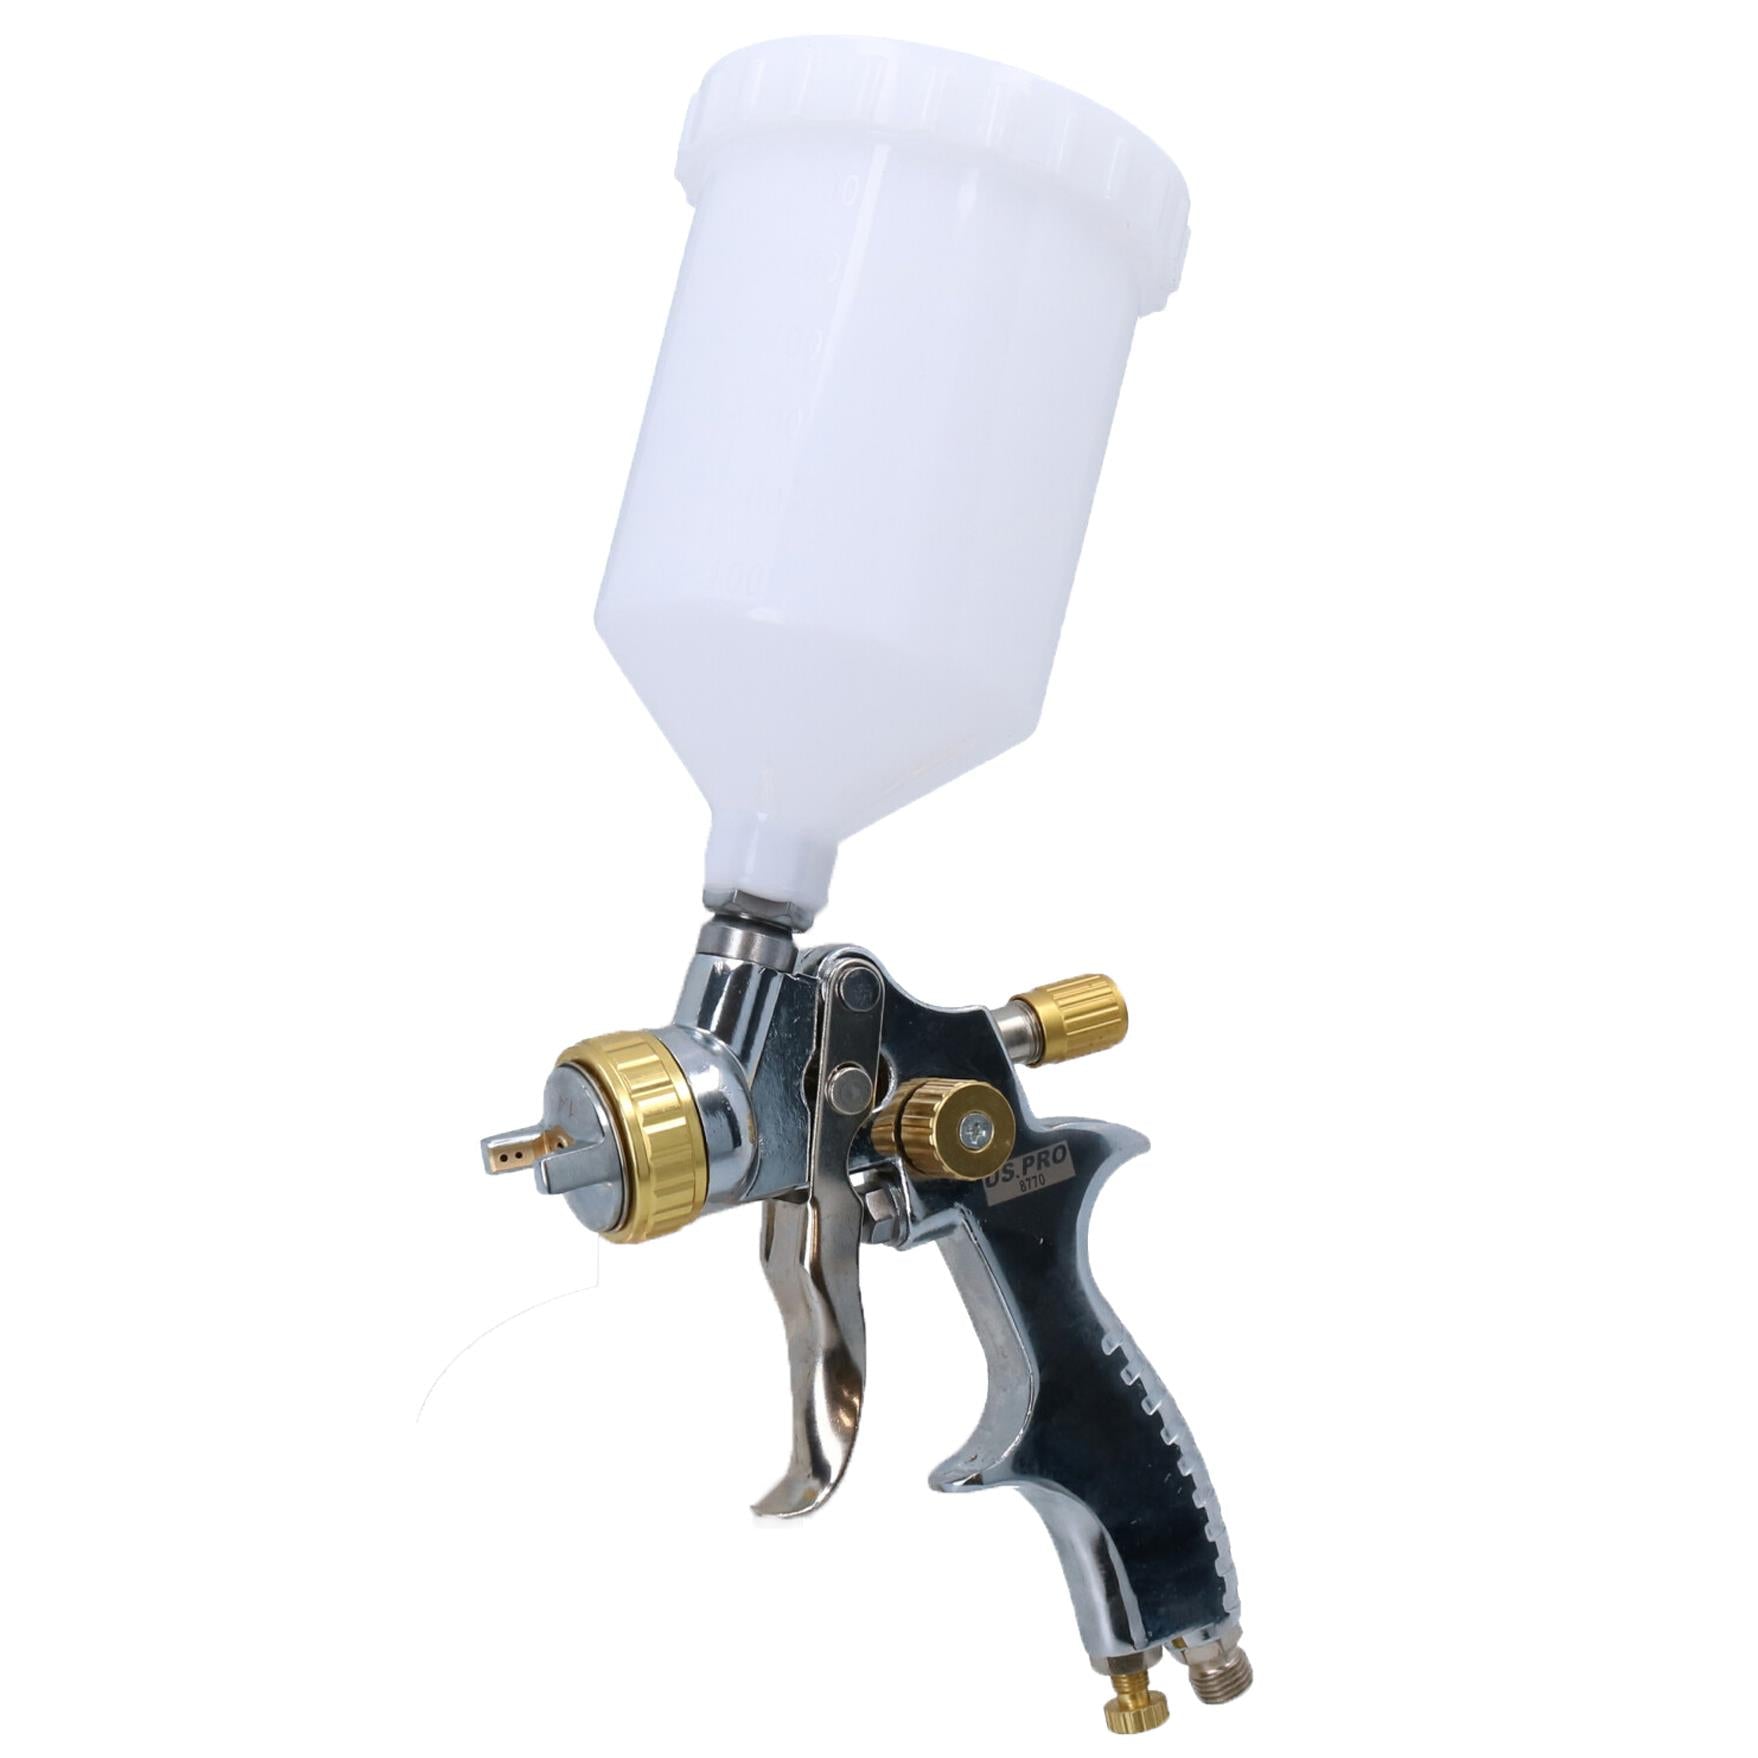 Gravity Feed LVLP Spray Painting Paint Gun 1.4mm Nozzle With 600ml Cup